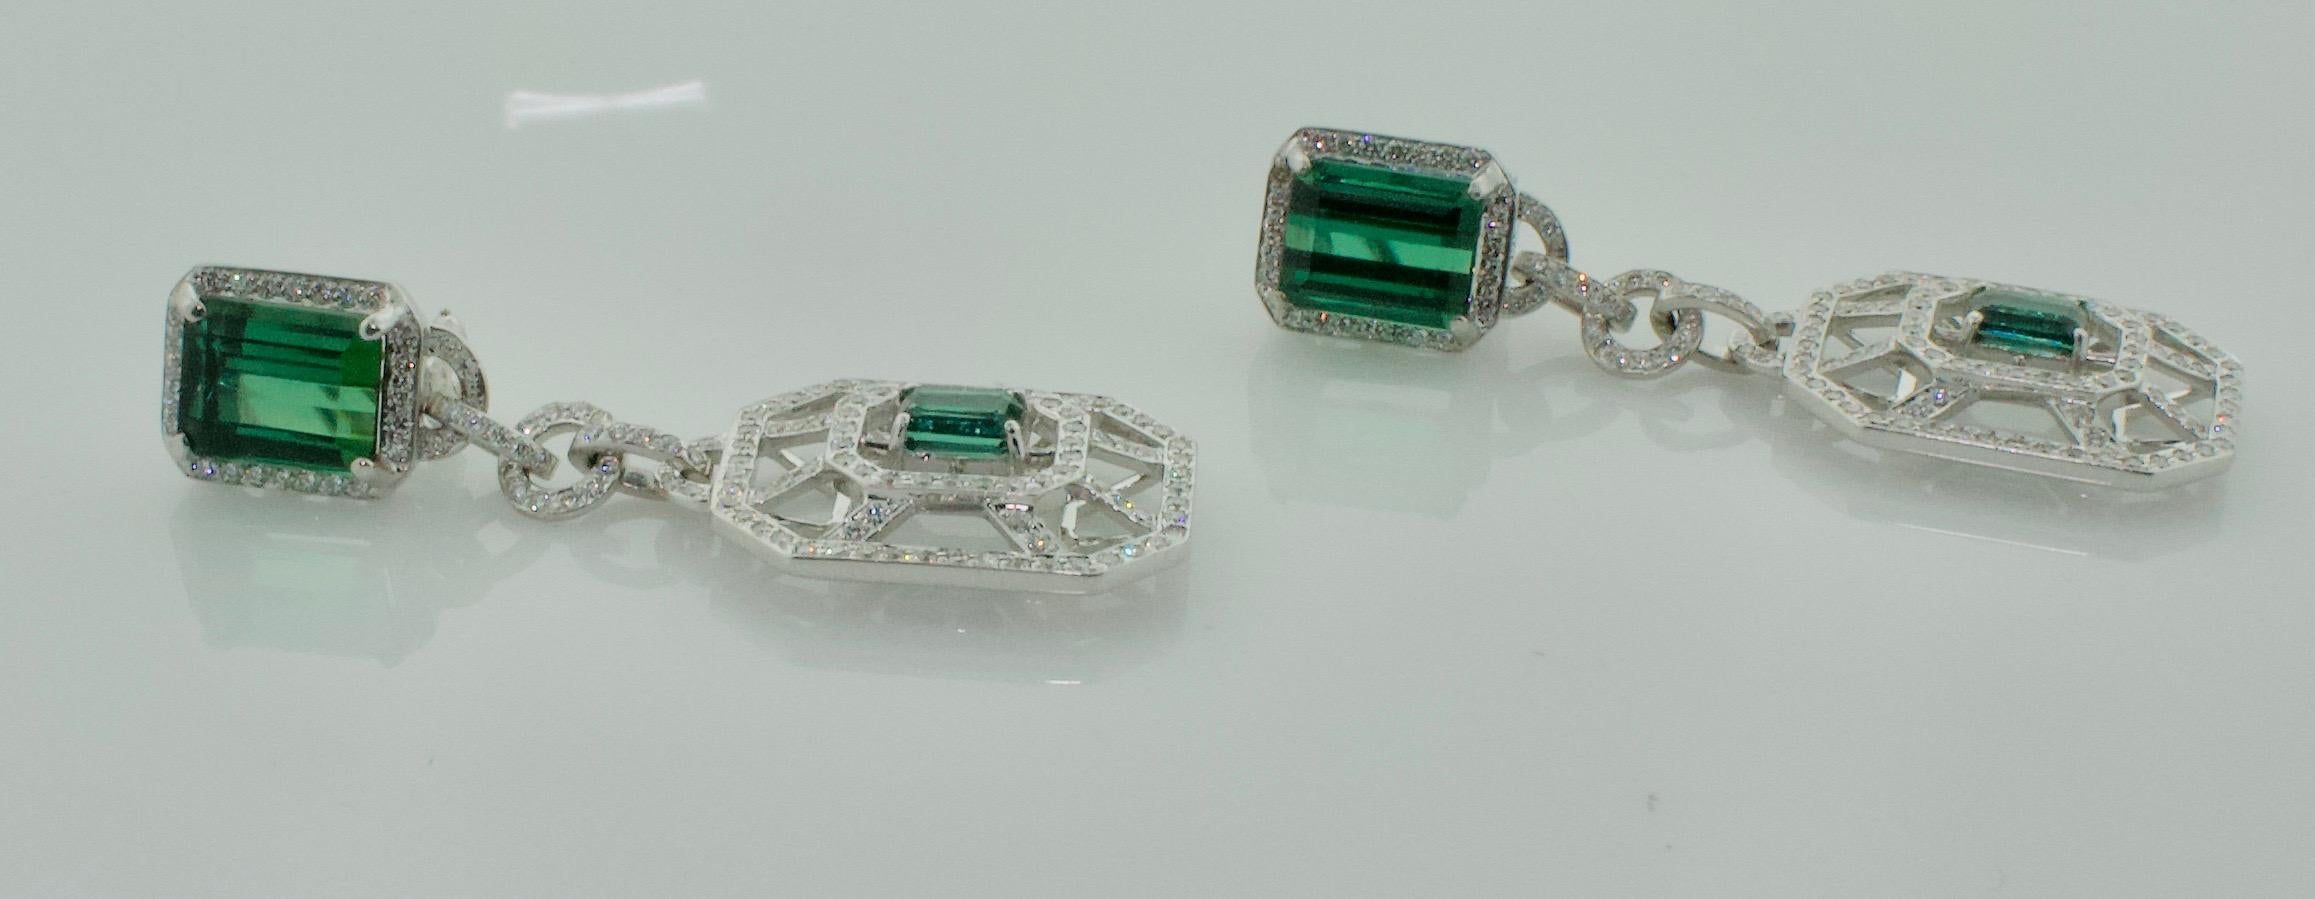 Green Tourmaline and Diamond Dangling Earrings in 18 Karat White Gold In New Condition For Sale In Wailea, HI